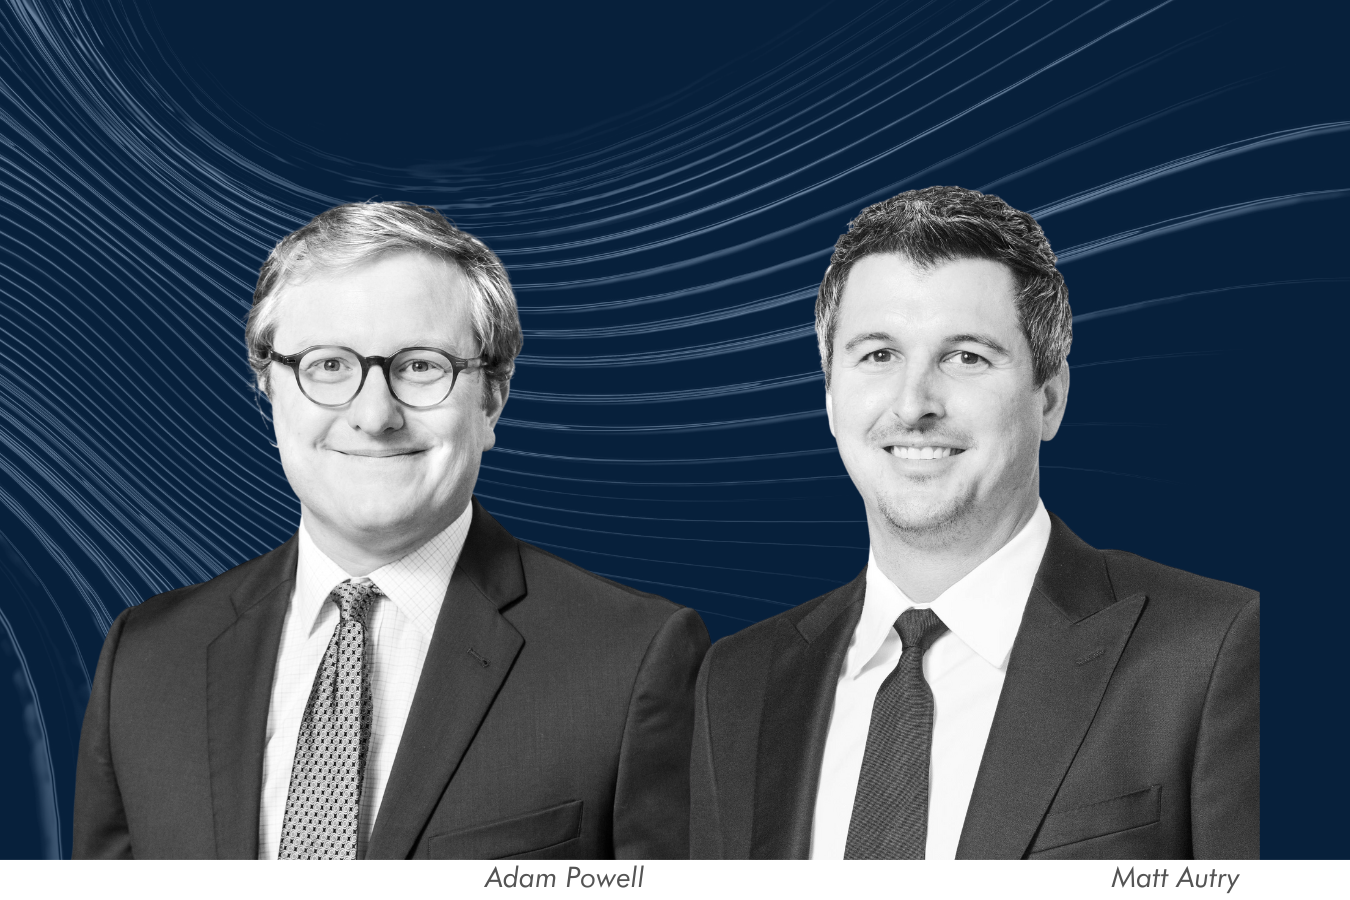 Two Valor Executives Named Finalists in D CEO's 2022 Energy Awards - Matt Autry & Adam Powell.